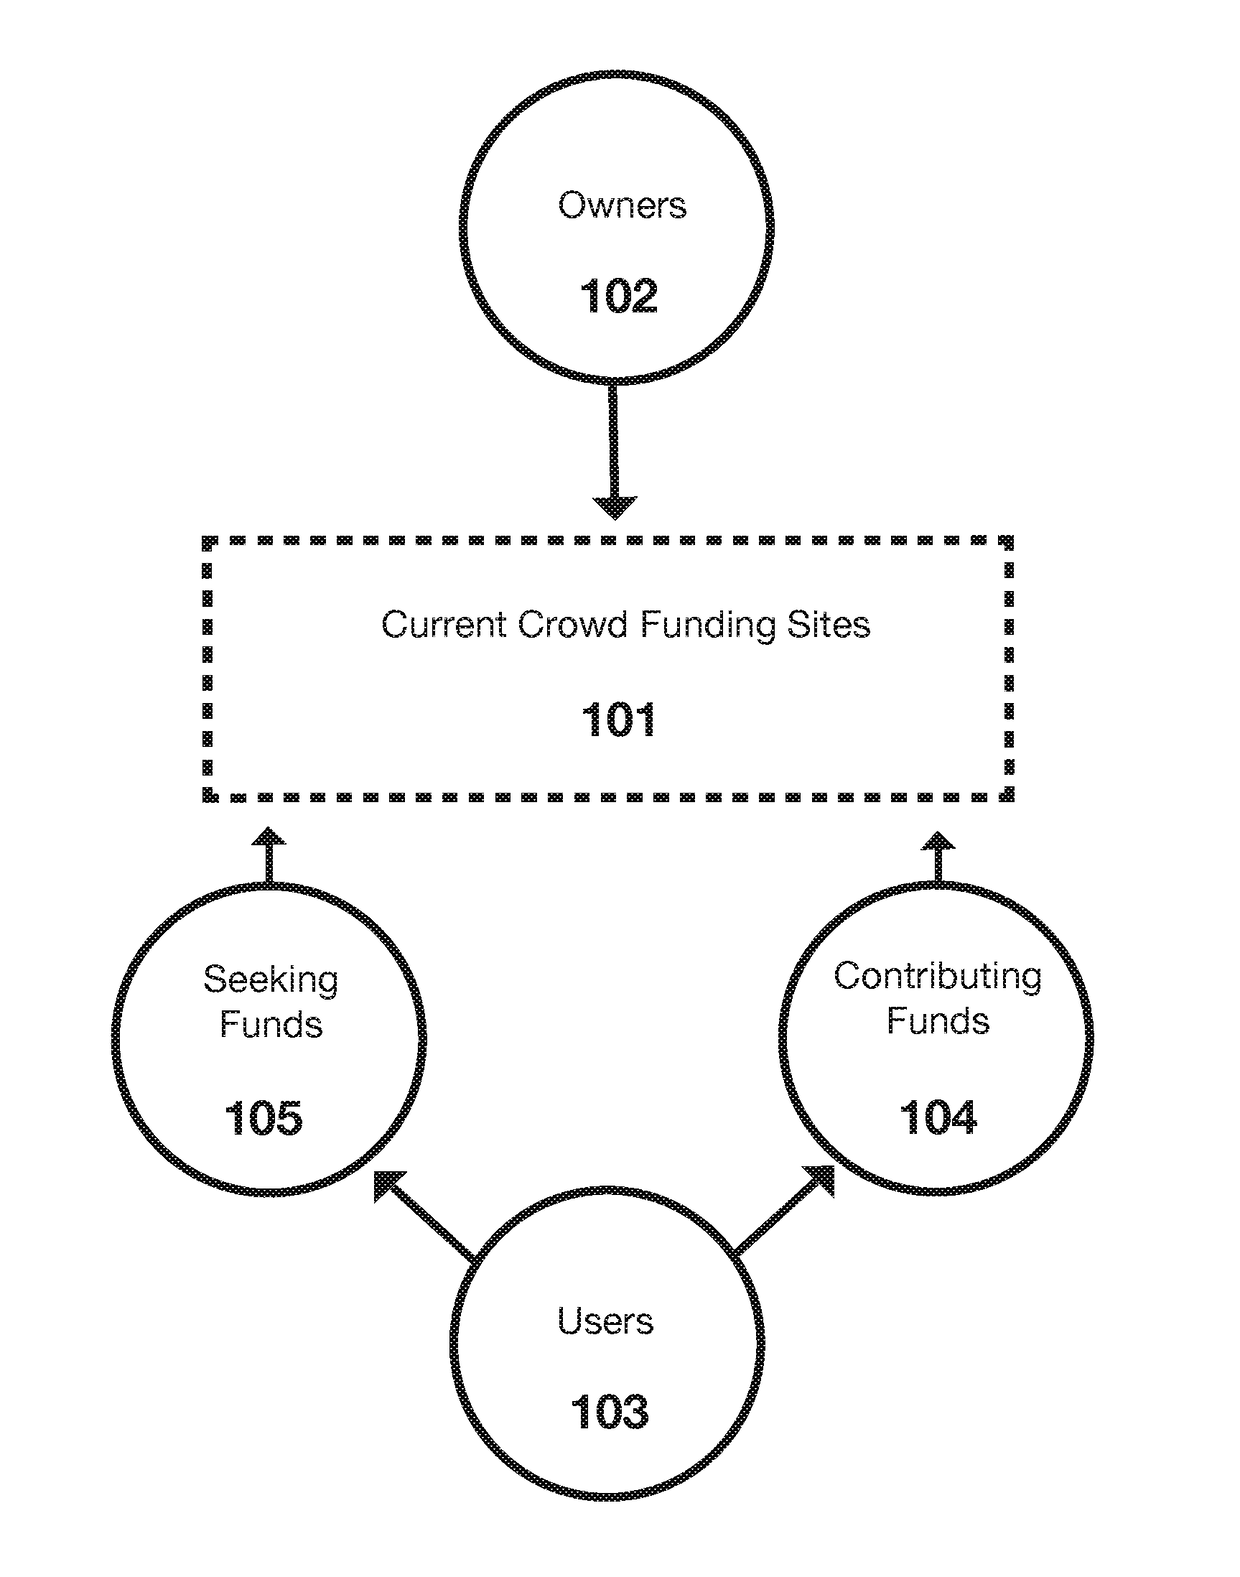 Apparatus and Method for Assisting Existing Social Networks to Fund and Support Ventures